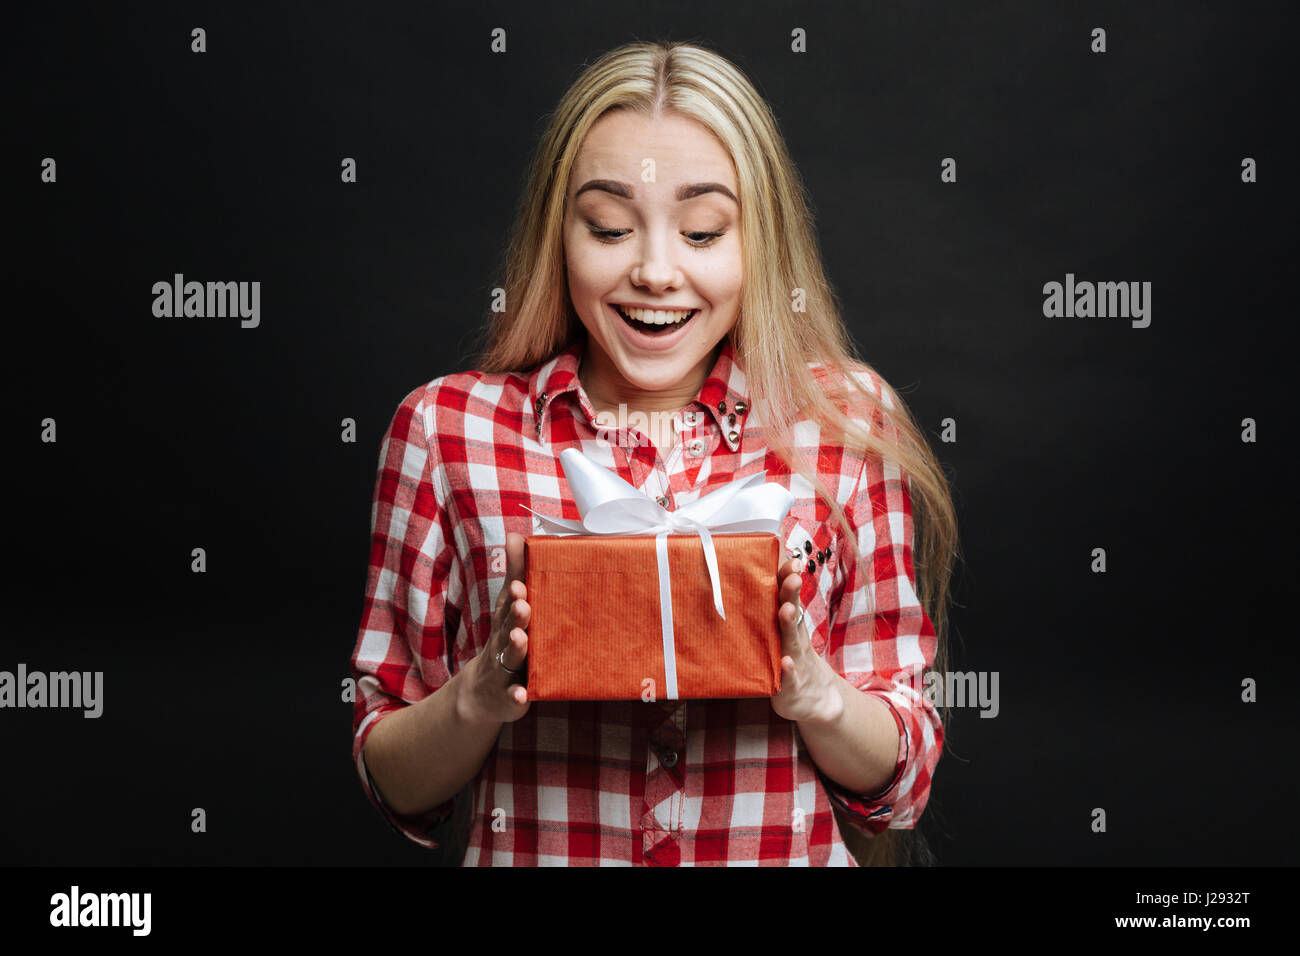 Touched girl getting gift box in the black colored studio Stock Photo